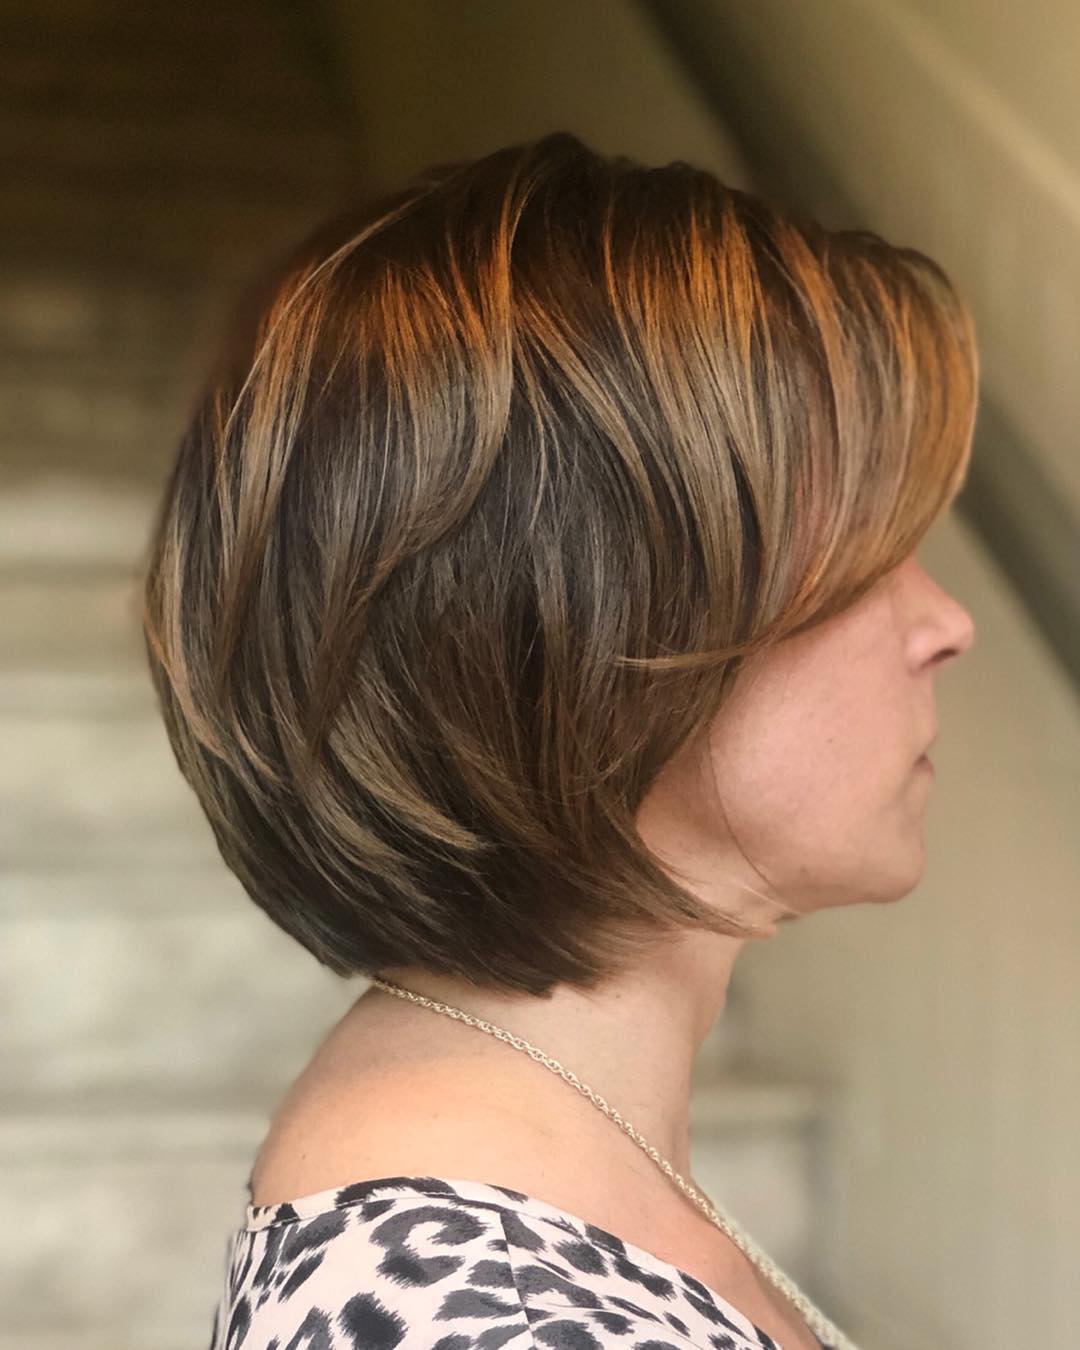 Best Hairstyles for Women Over 50 